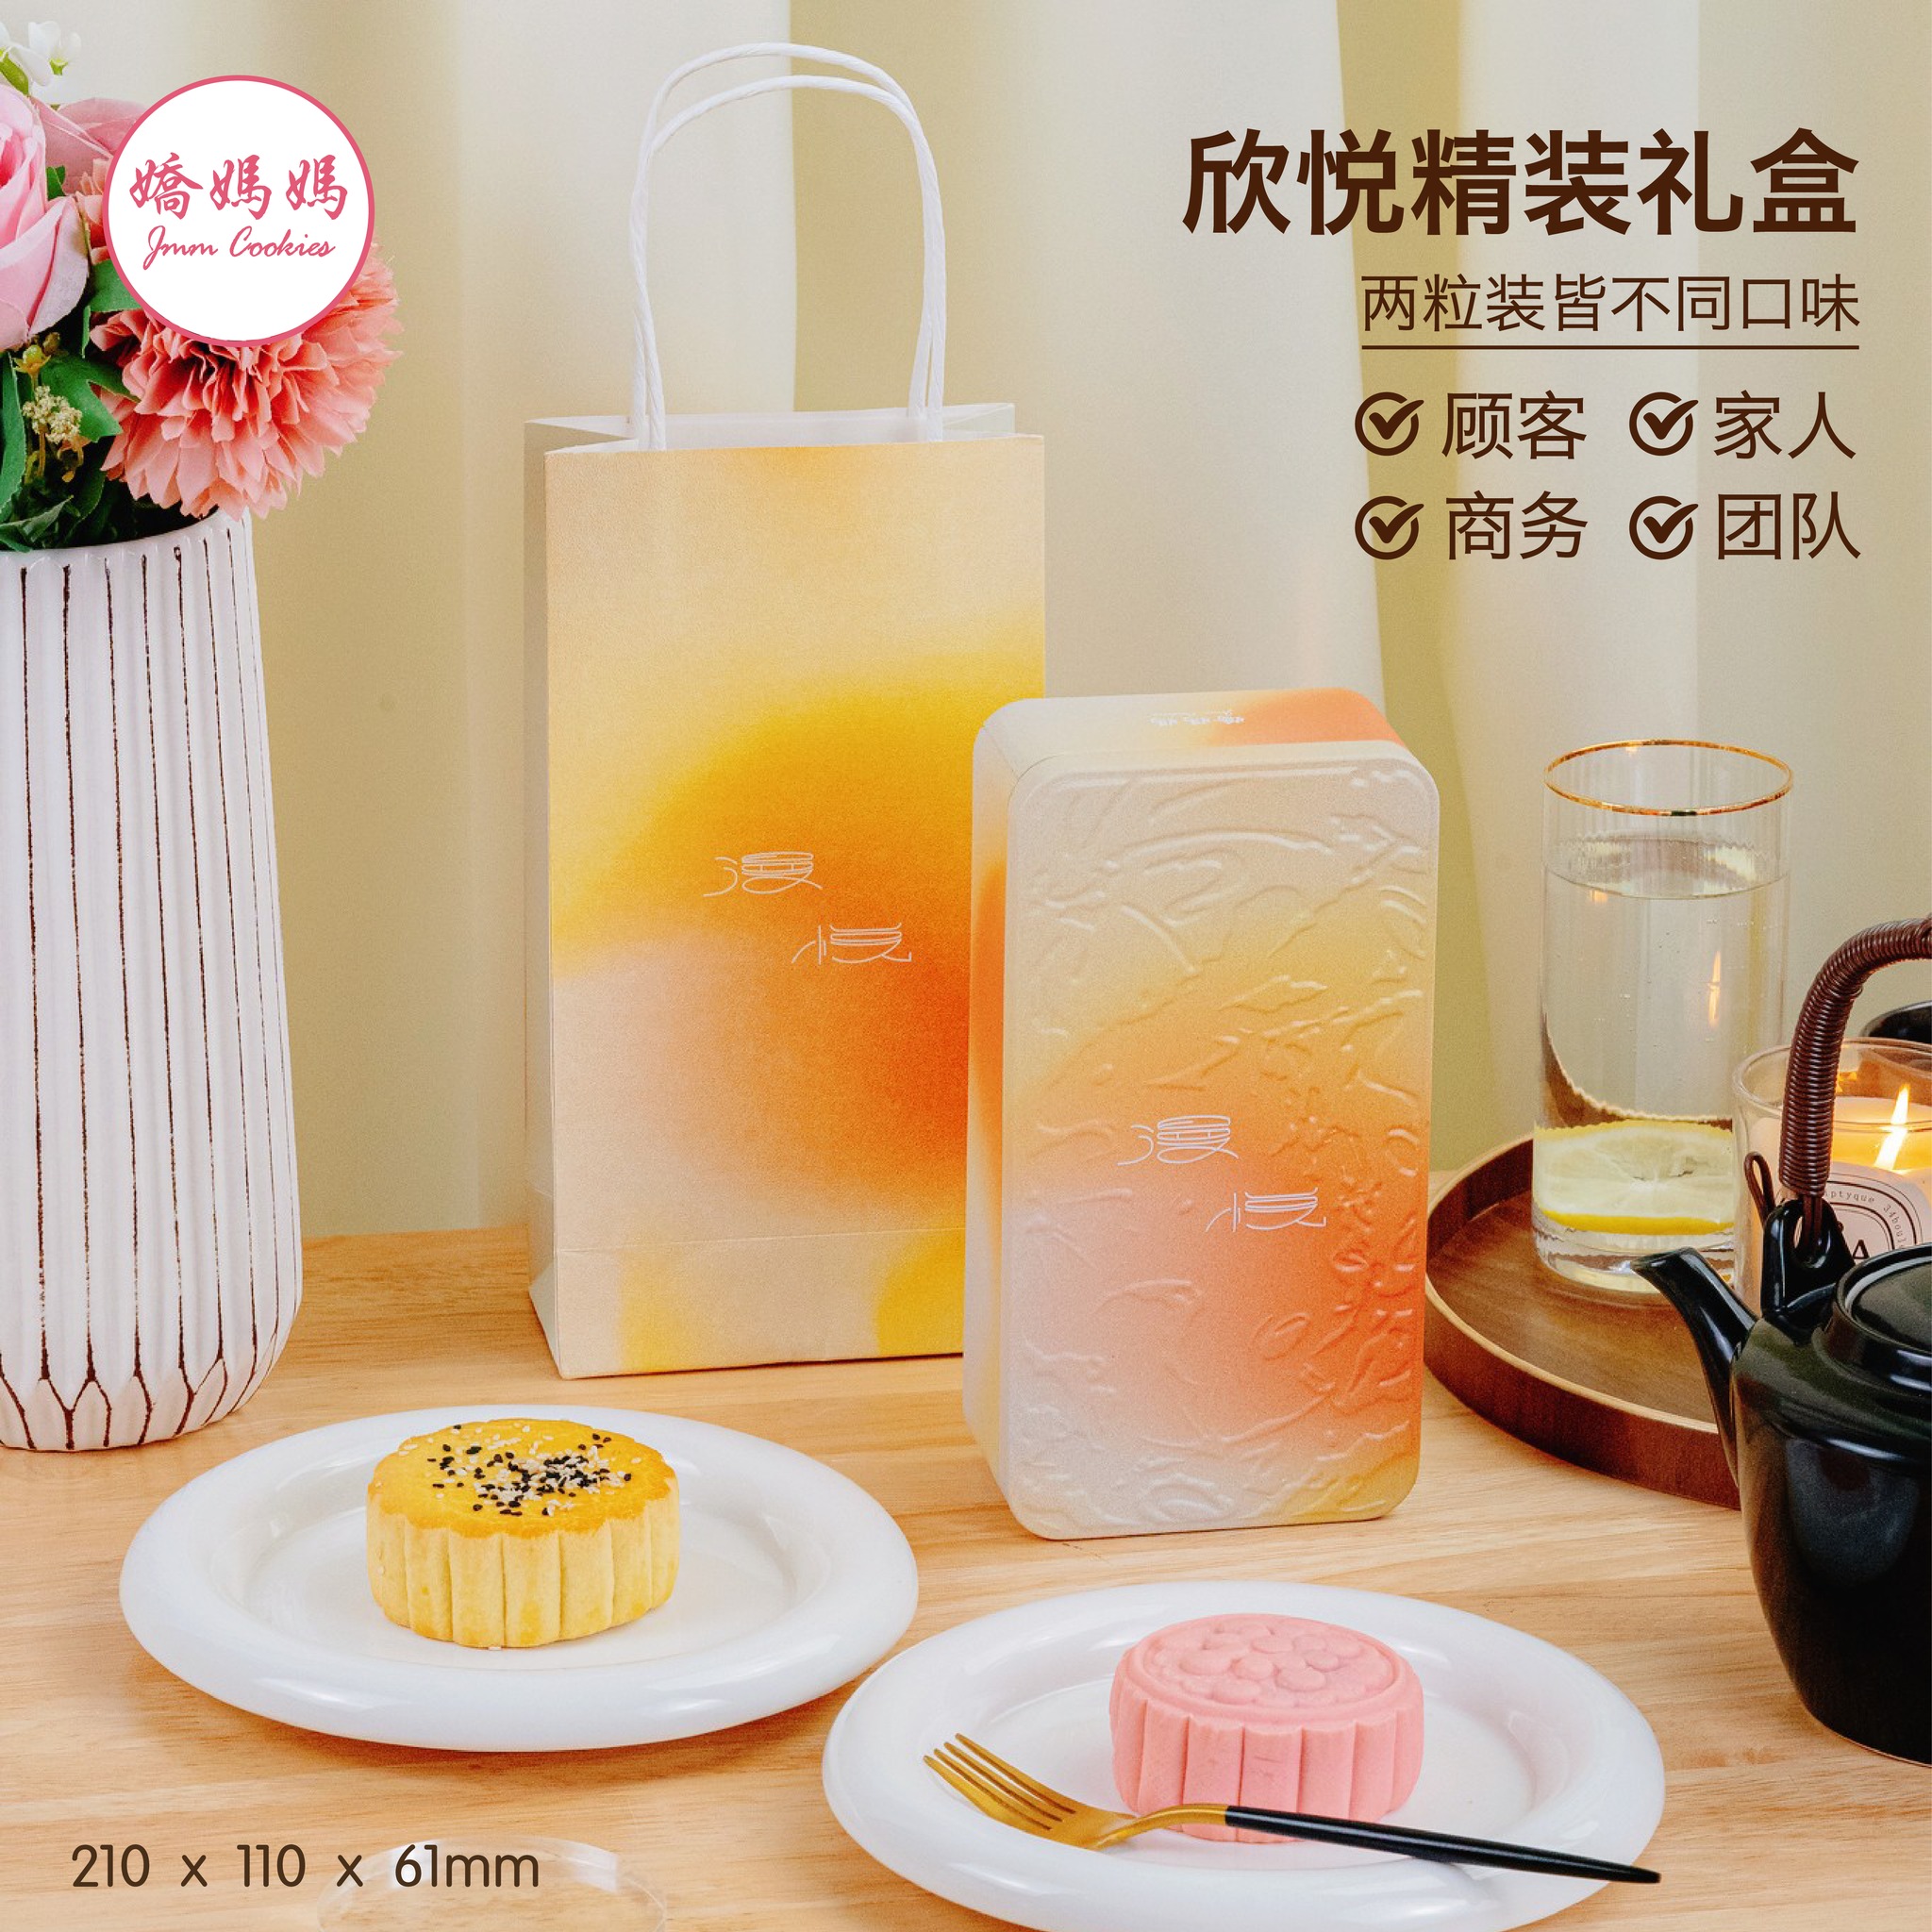 Incredibly Gorgeous Mooncake Gift Sets That Will Amaze You